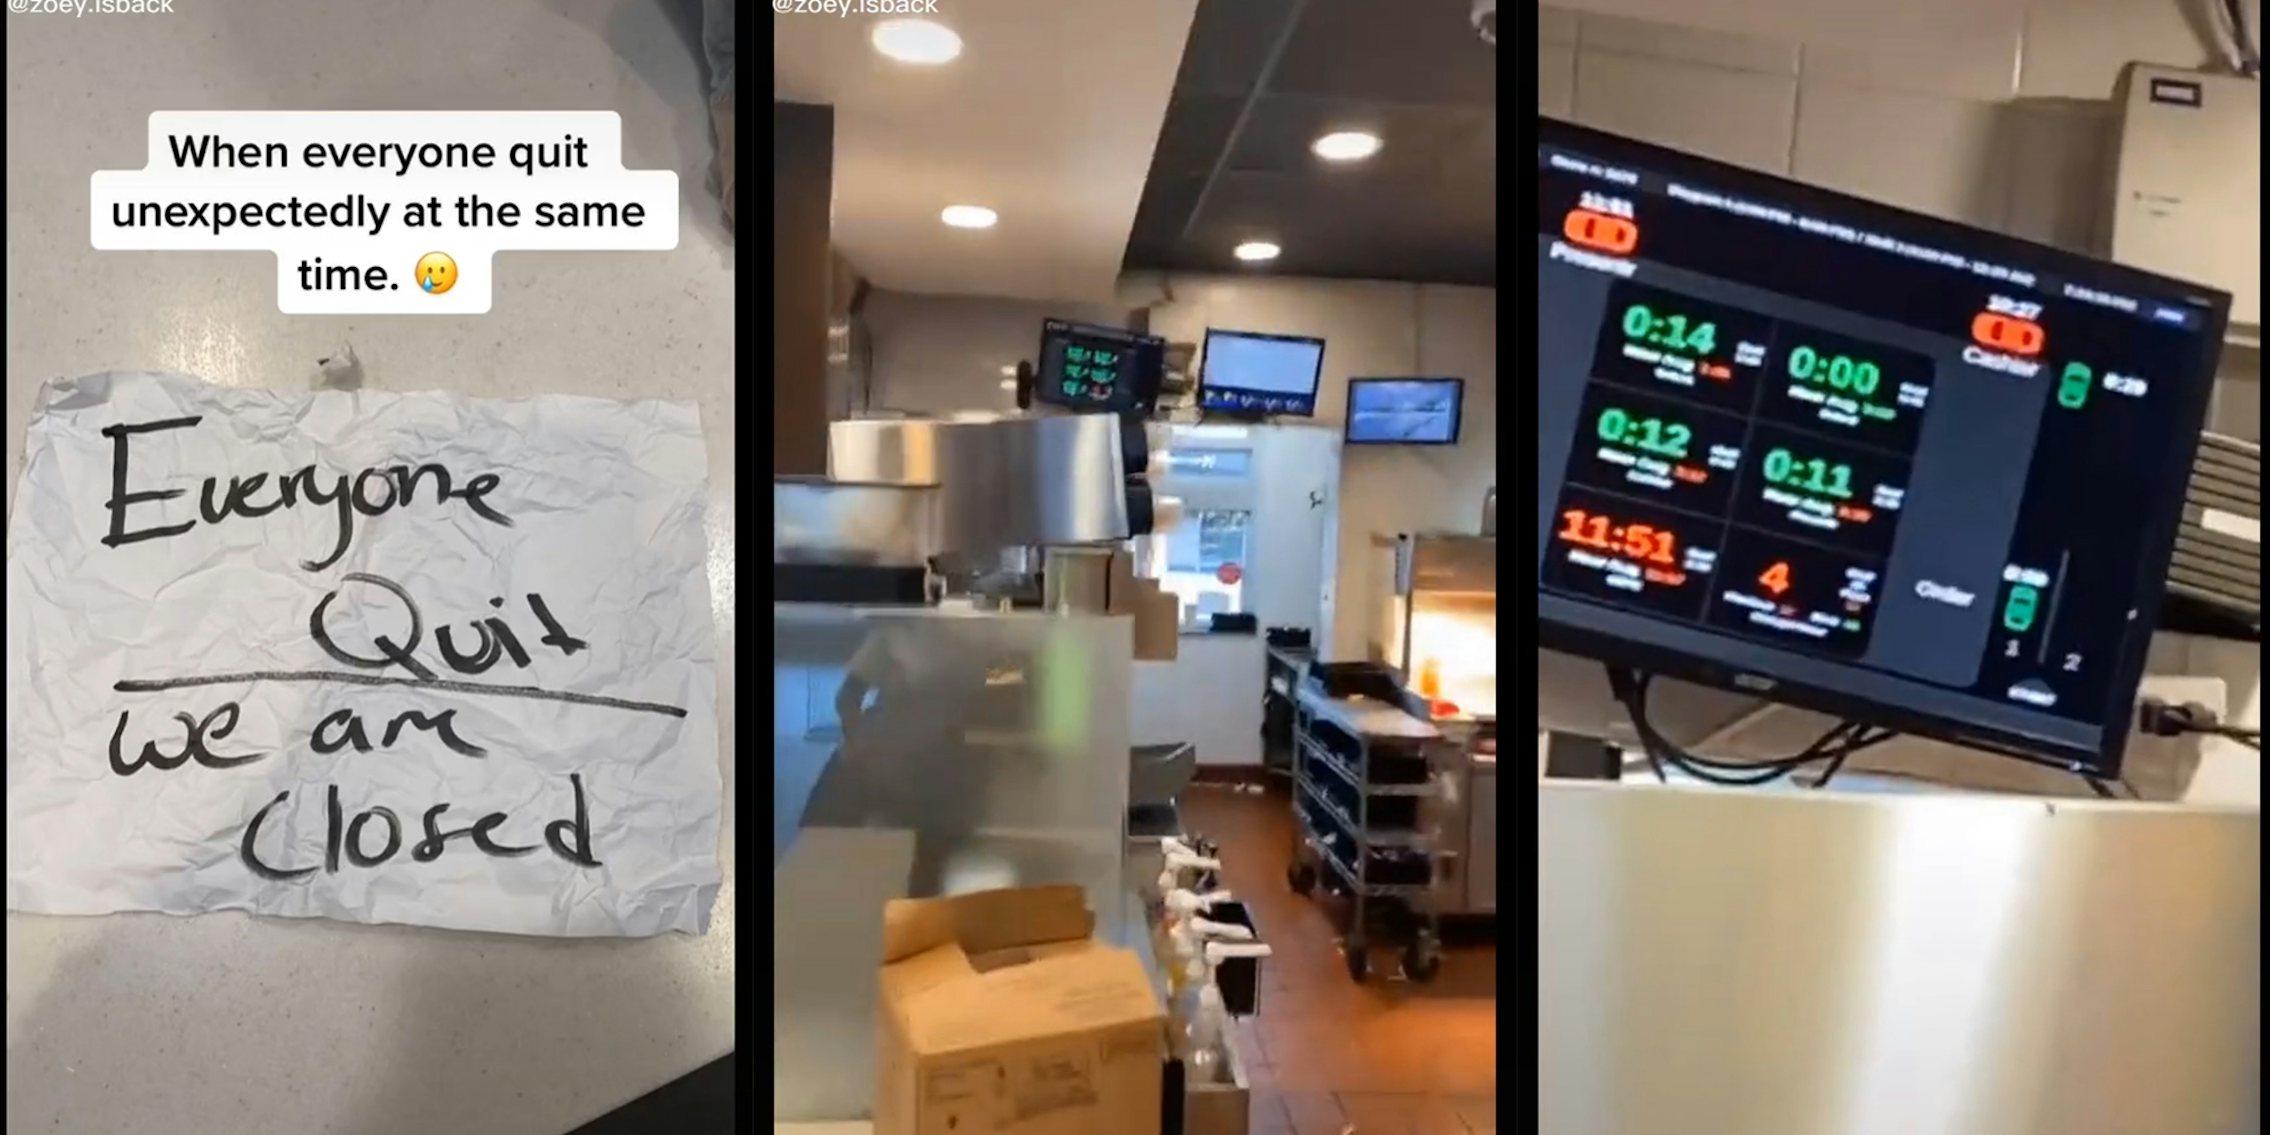 Handwritten note 'Everyone Quit / We are closed' with caption 'When everyone quit unexpectedly at the same time.' (l) empty McDonald's front line (c) status board showing drive-thru service over 1 minutes long (r)